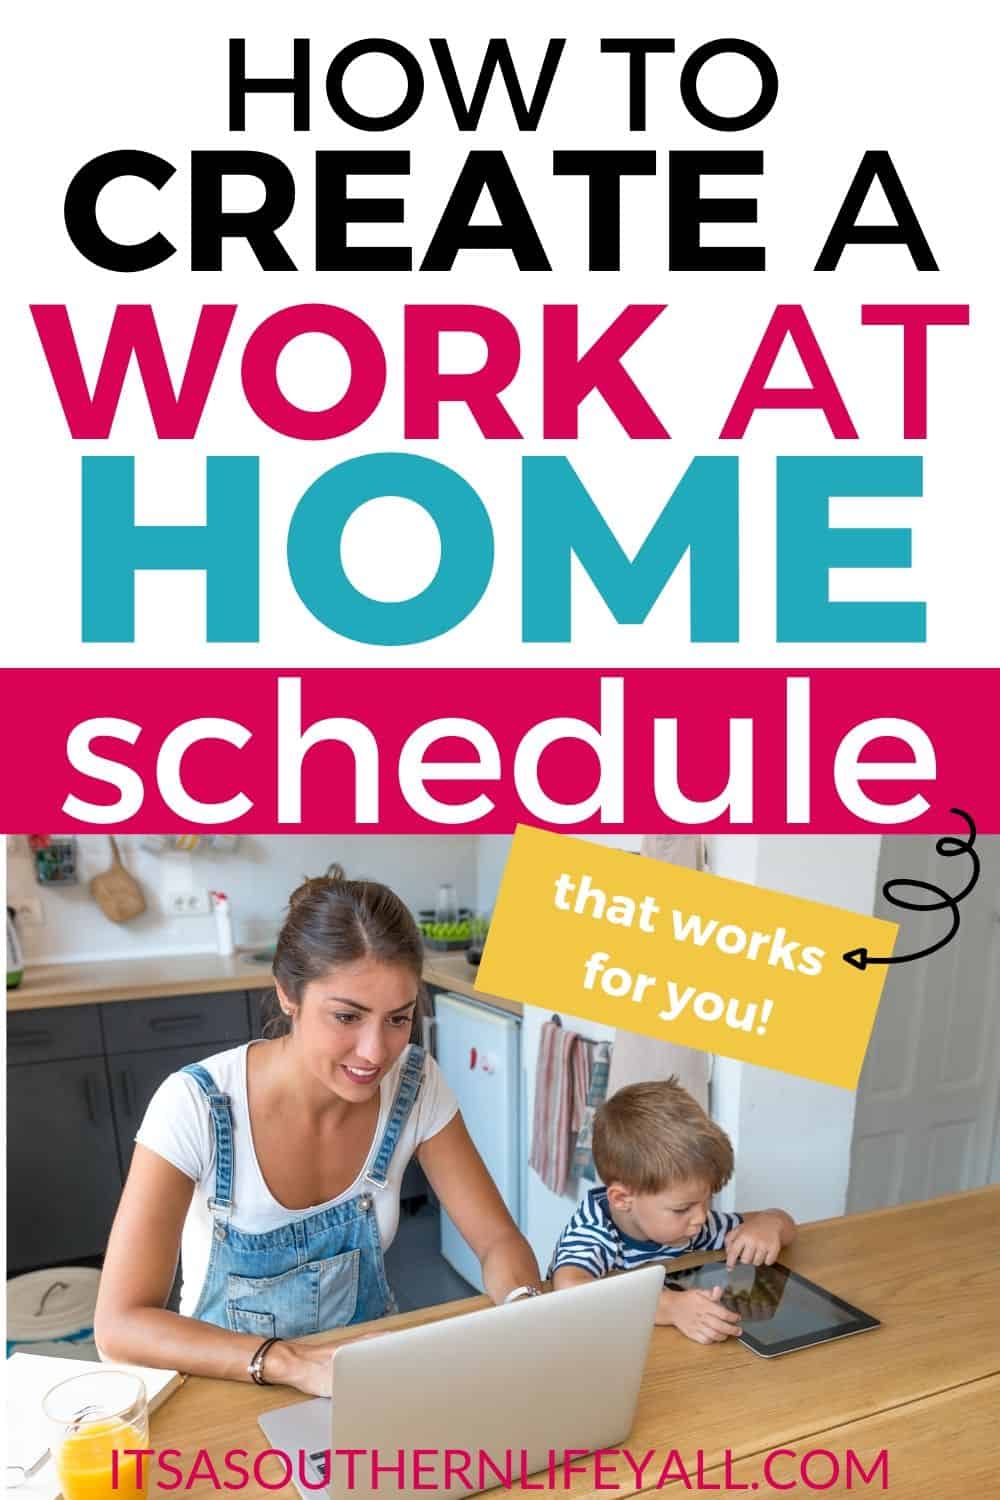 Image of woman working at computer in kitchen with child next to her with Create a Work at home schedule that works for you text overlay.